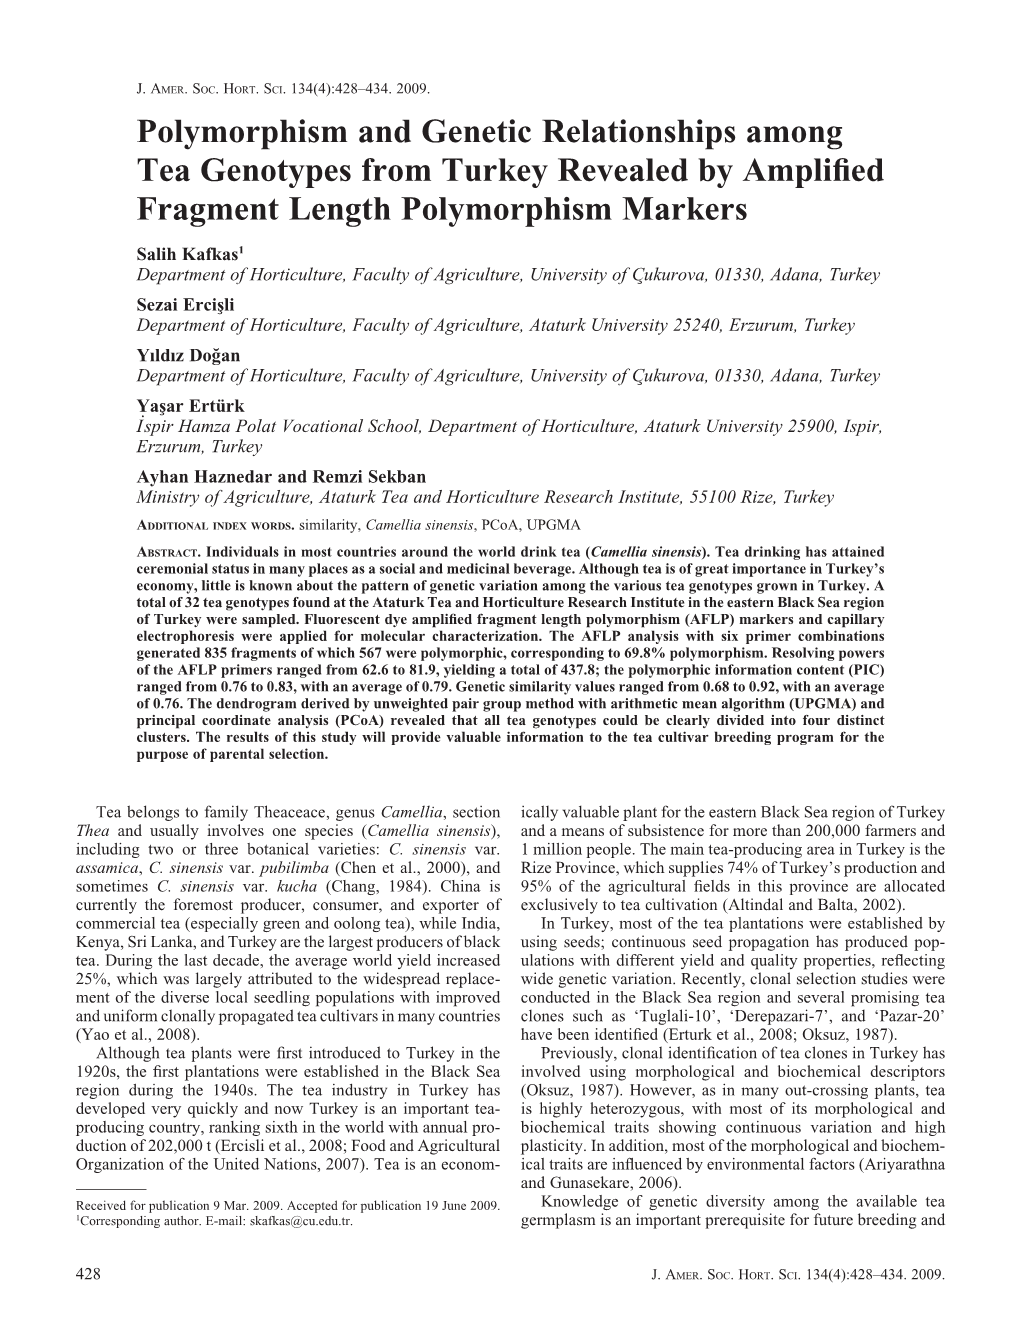 Polymorphism and Genetic Relationships Among Tea Genotypes from Turkey Revealed by Amplified Fragment Length Polymorphism Marker